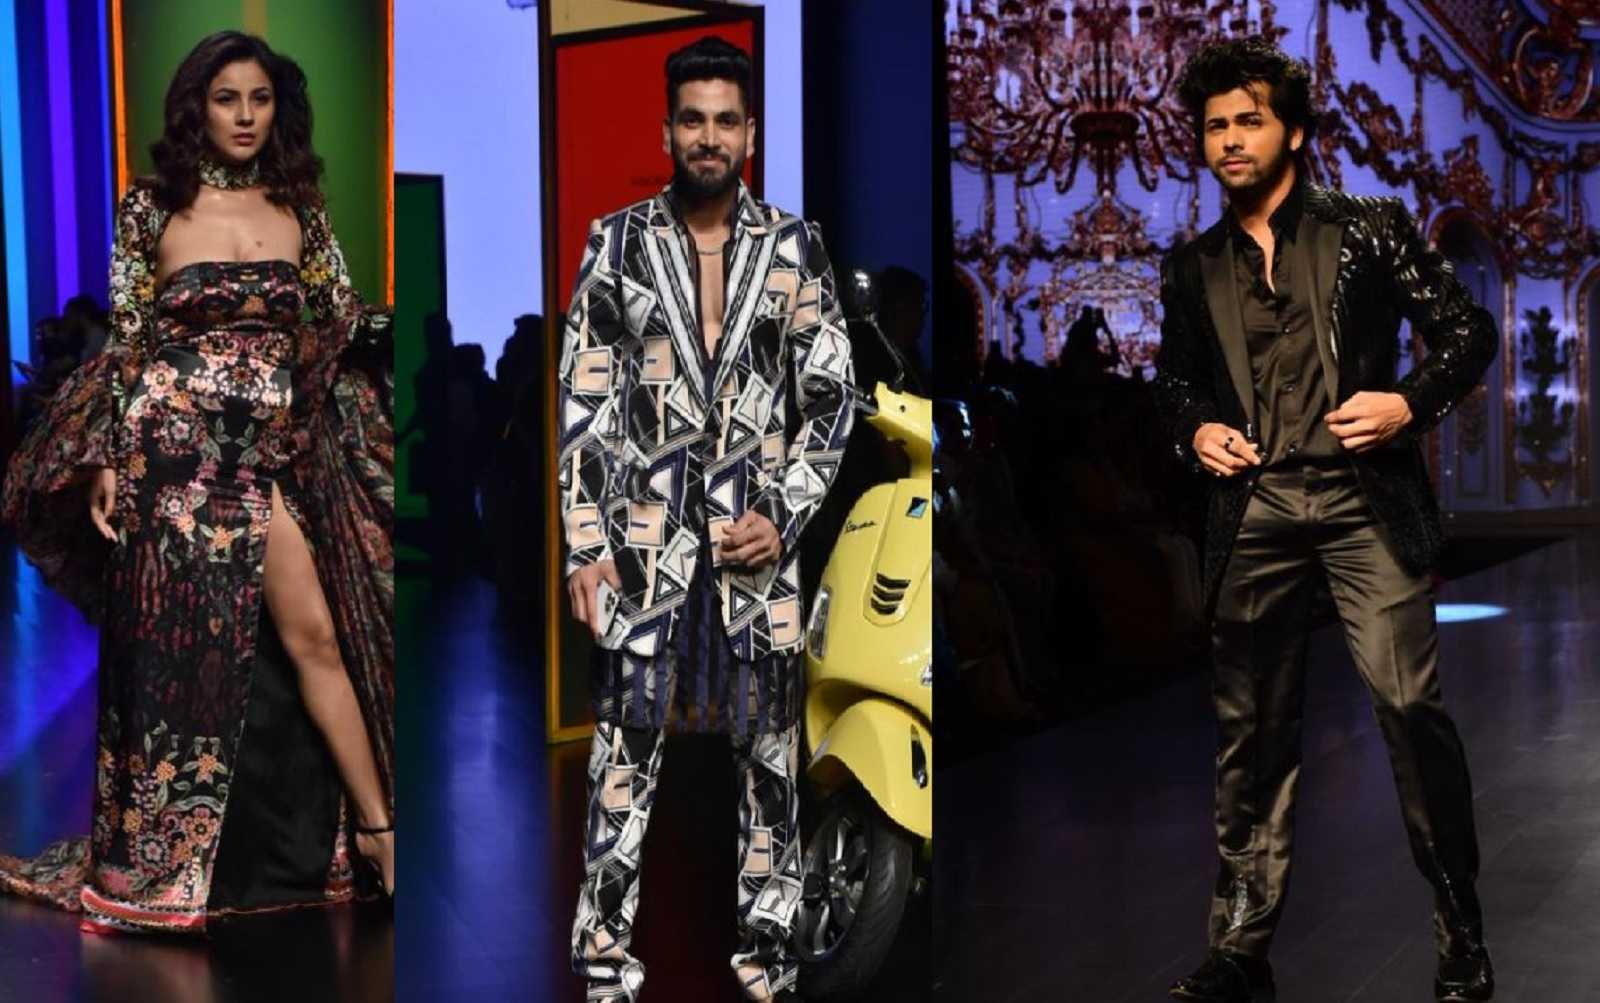 From Shehnaaz Gill rocking a high-slit dress to Siddharth Nigam performing a flip, TV stars turn show-stealers at fashion week